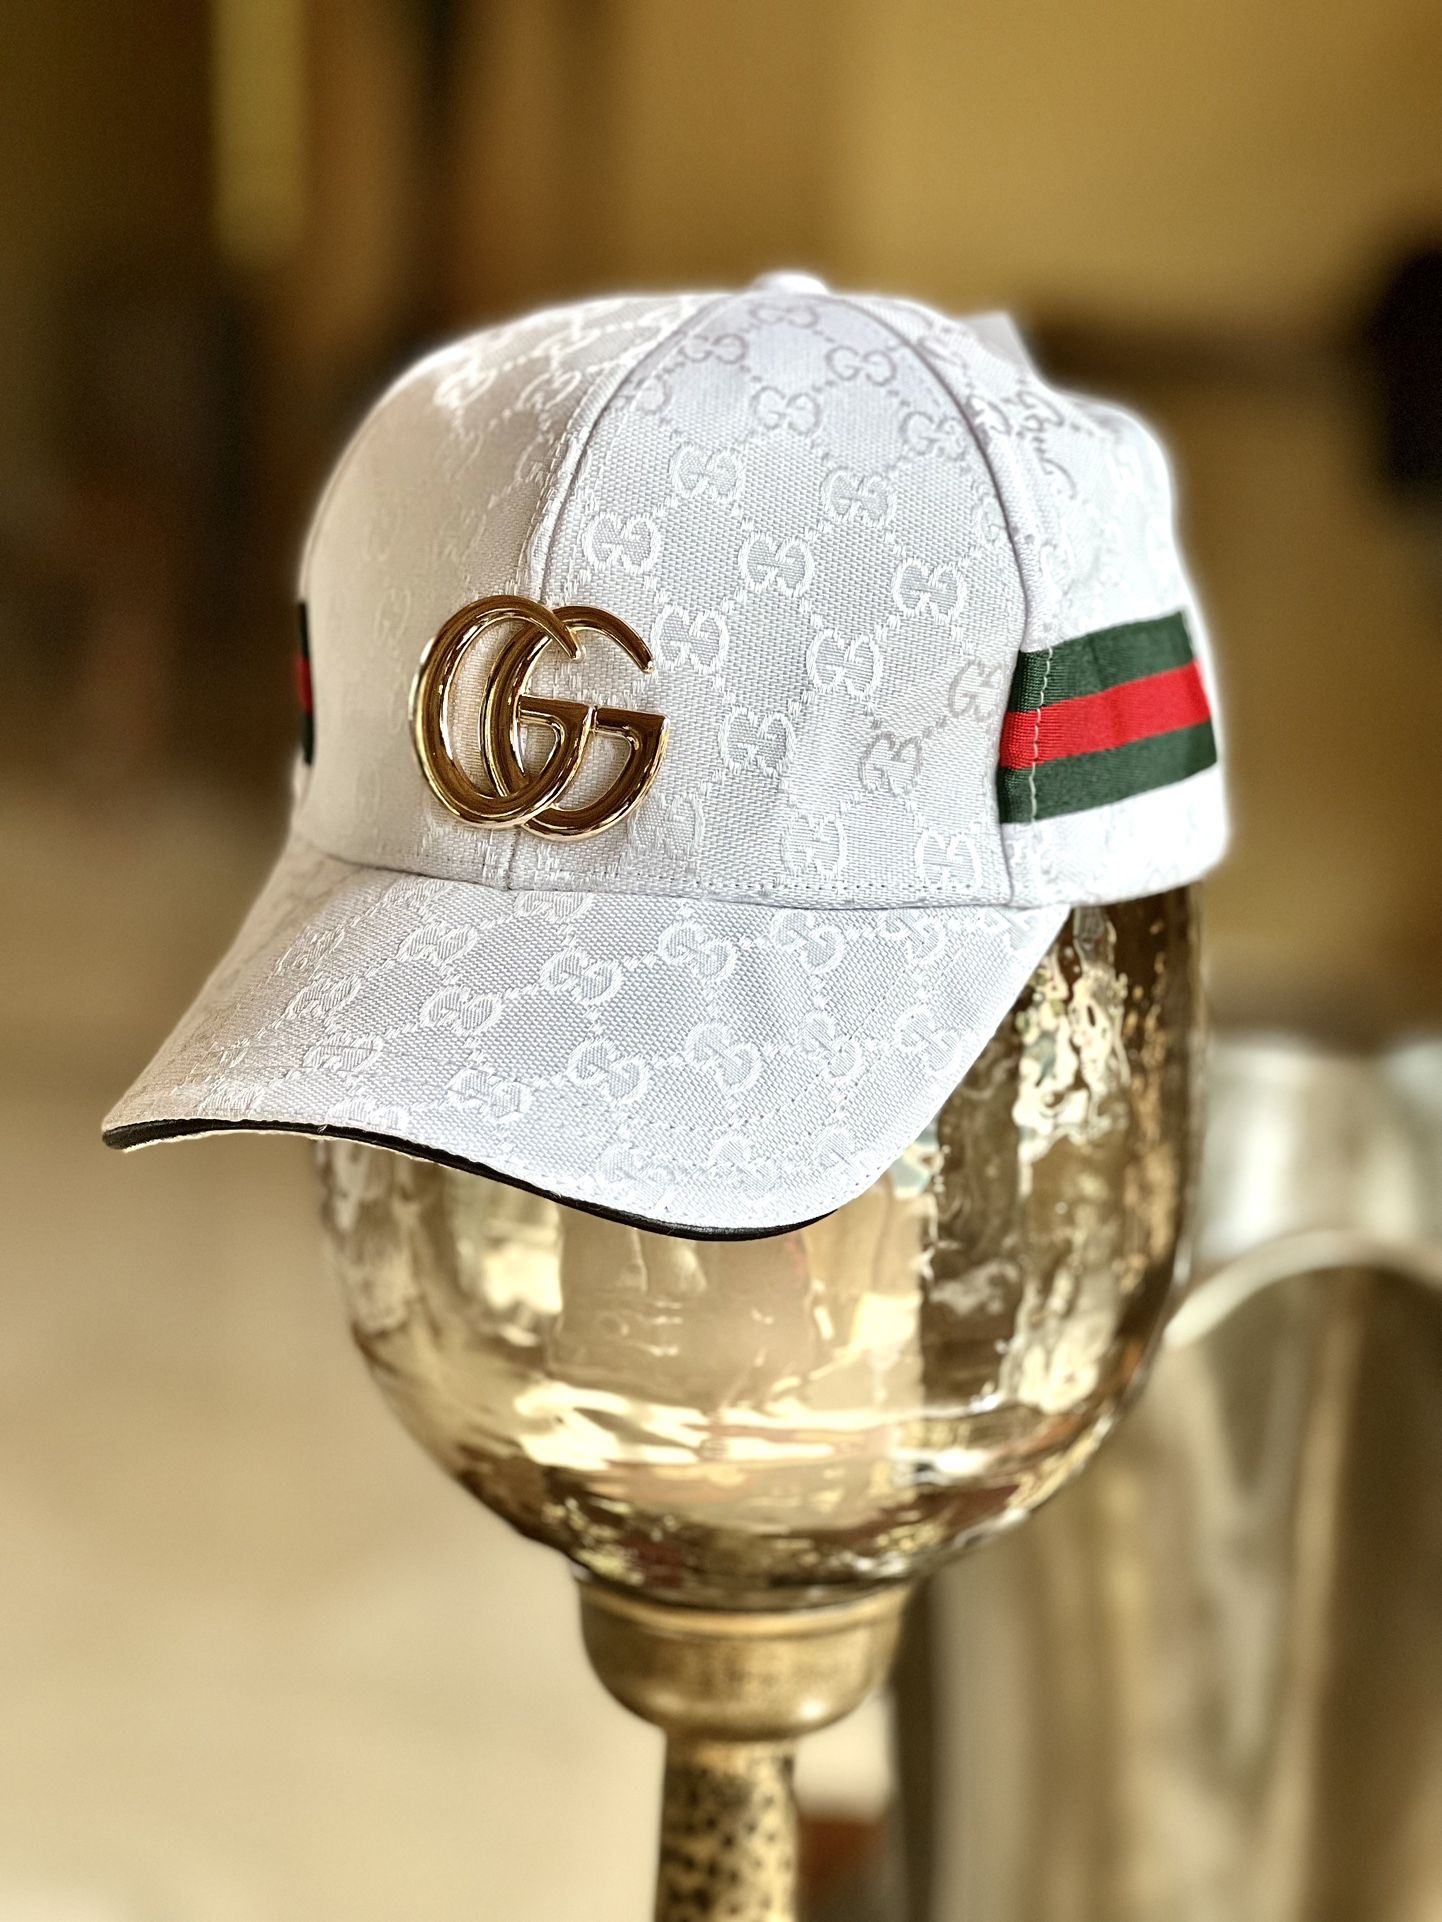 GG CANVAS BASEBALL HAT WITH WEB Gucci for Sale in West Palm Beach